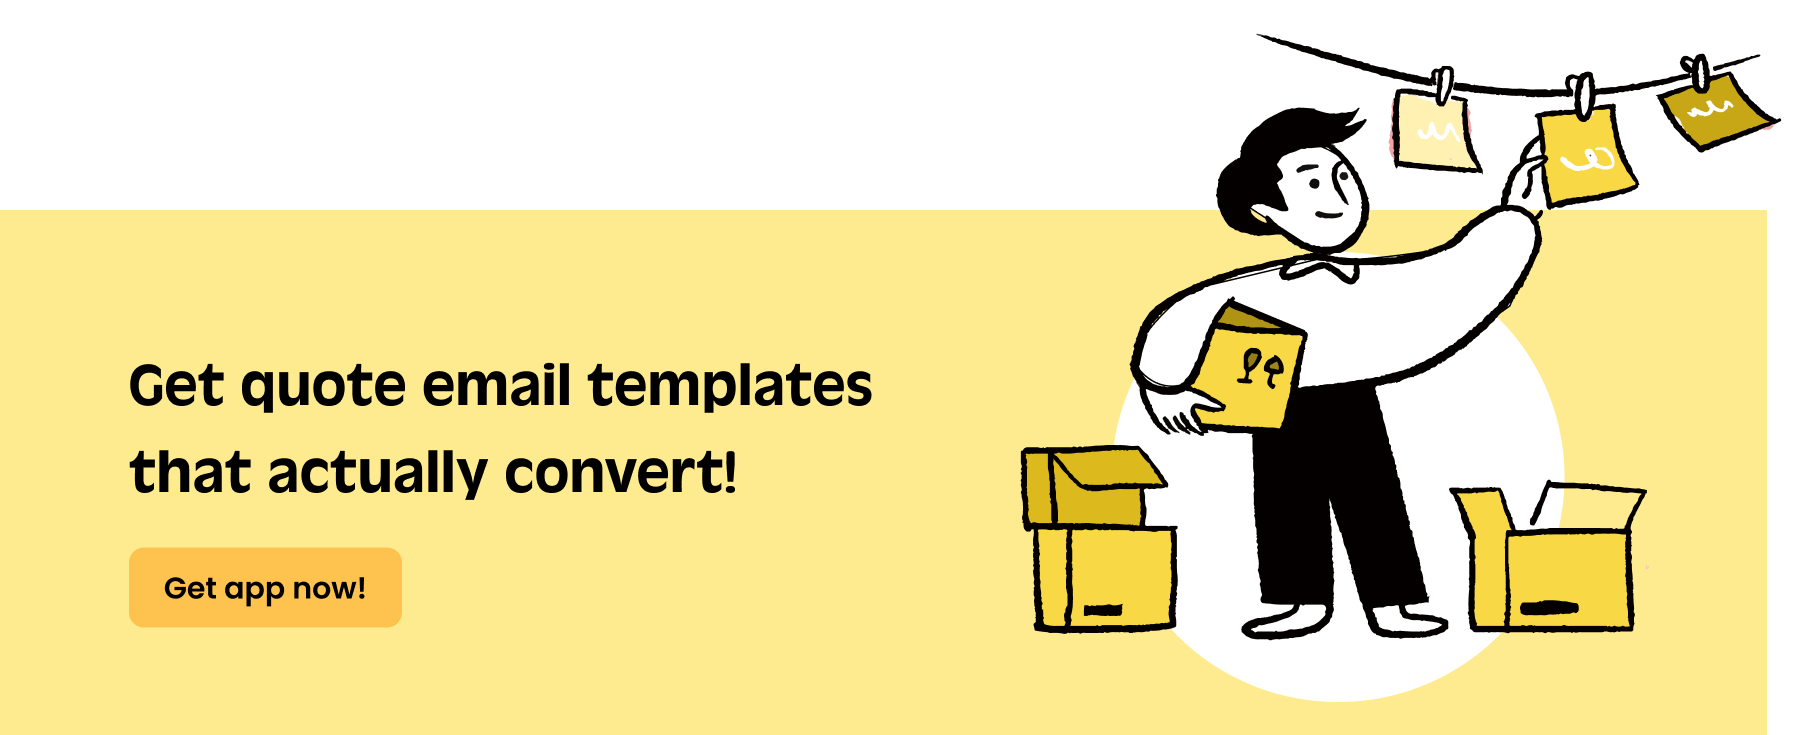 Get Quote email templates that actually convert with Quote Snap